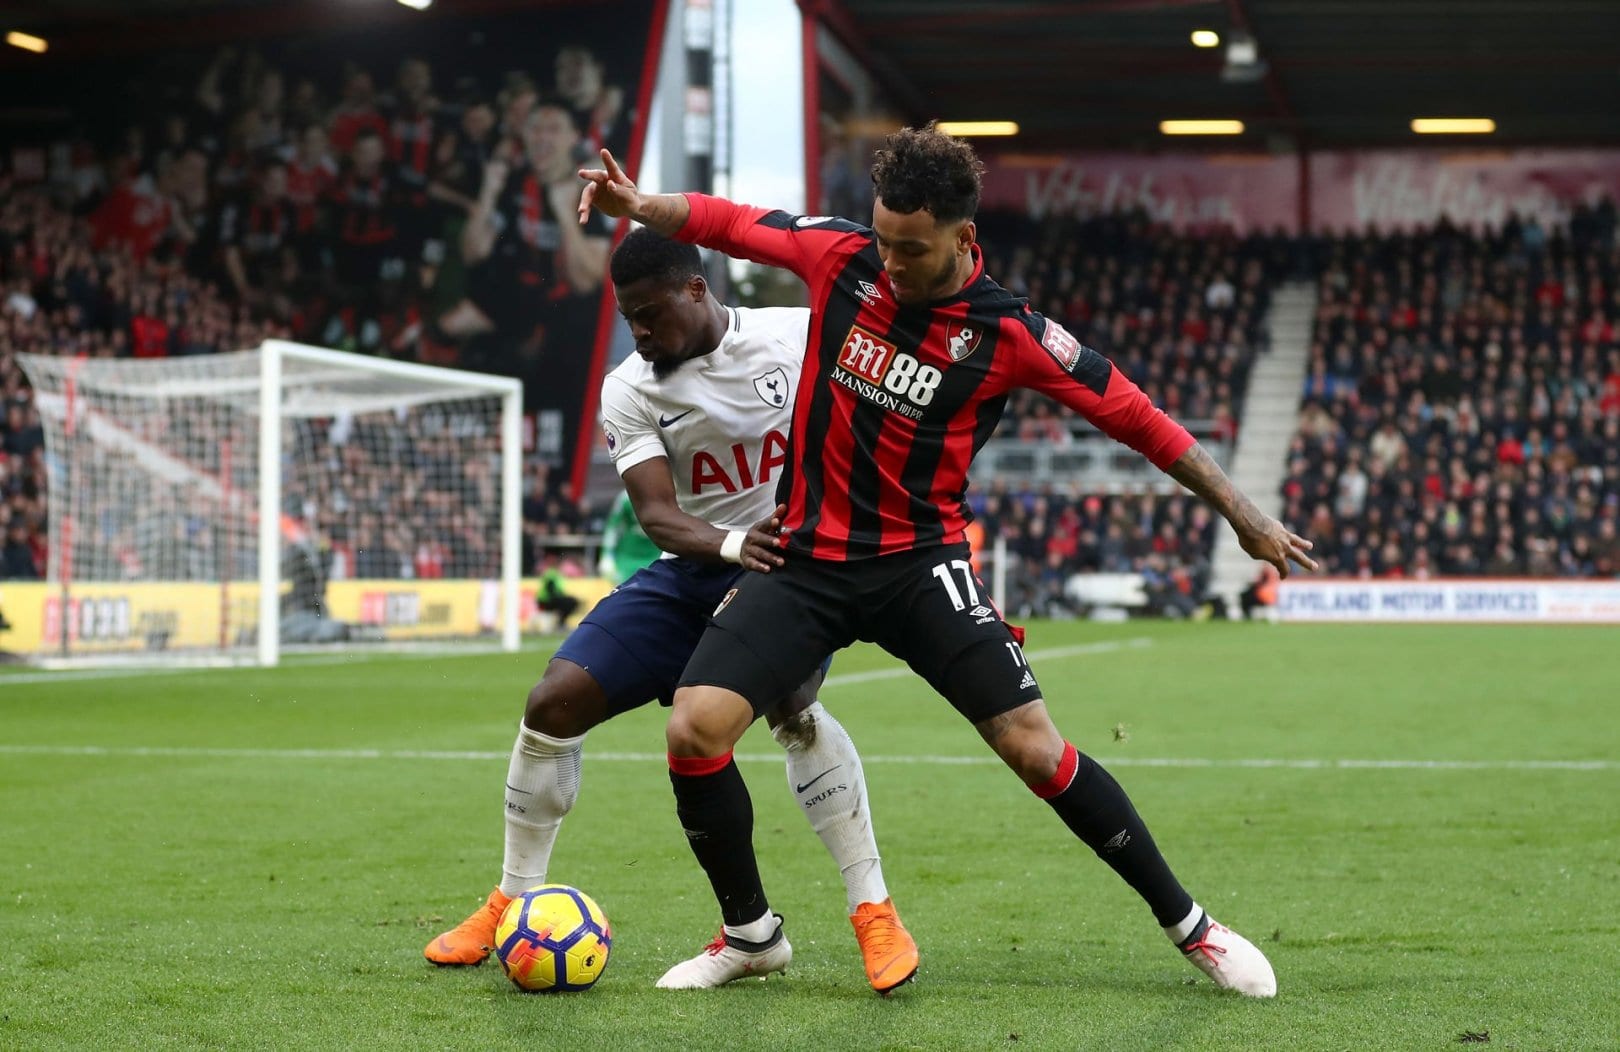 Incroyable Statistique Serge Aurier Contre Bournemouth